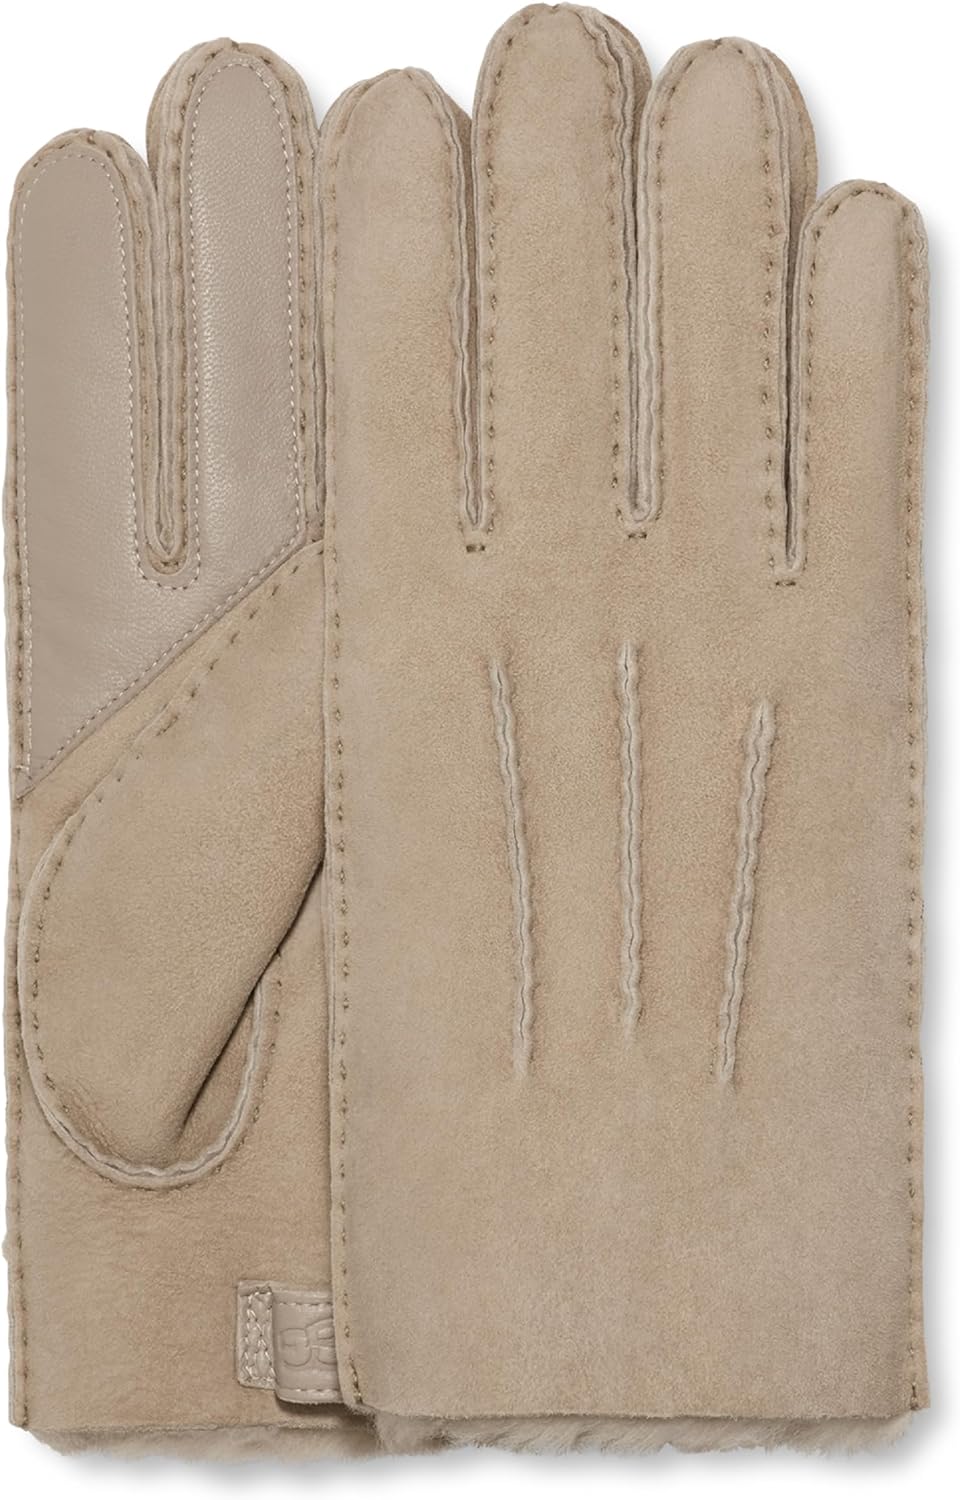 GLOVES MEN'S CONTRAST SHEEPSKIN PUTTY (Available in 2 Sizes)